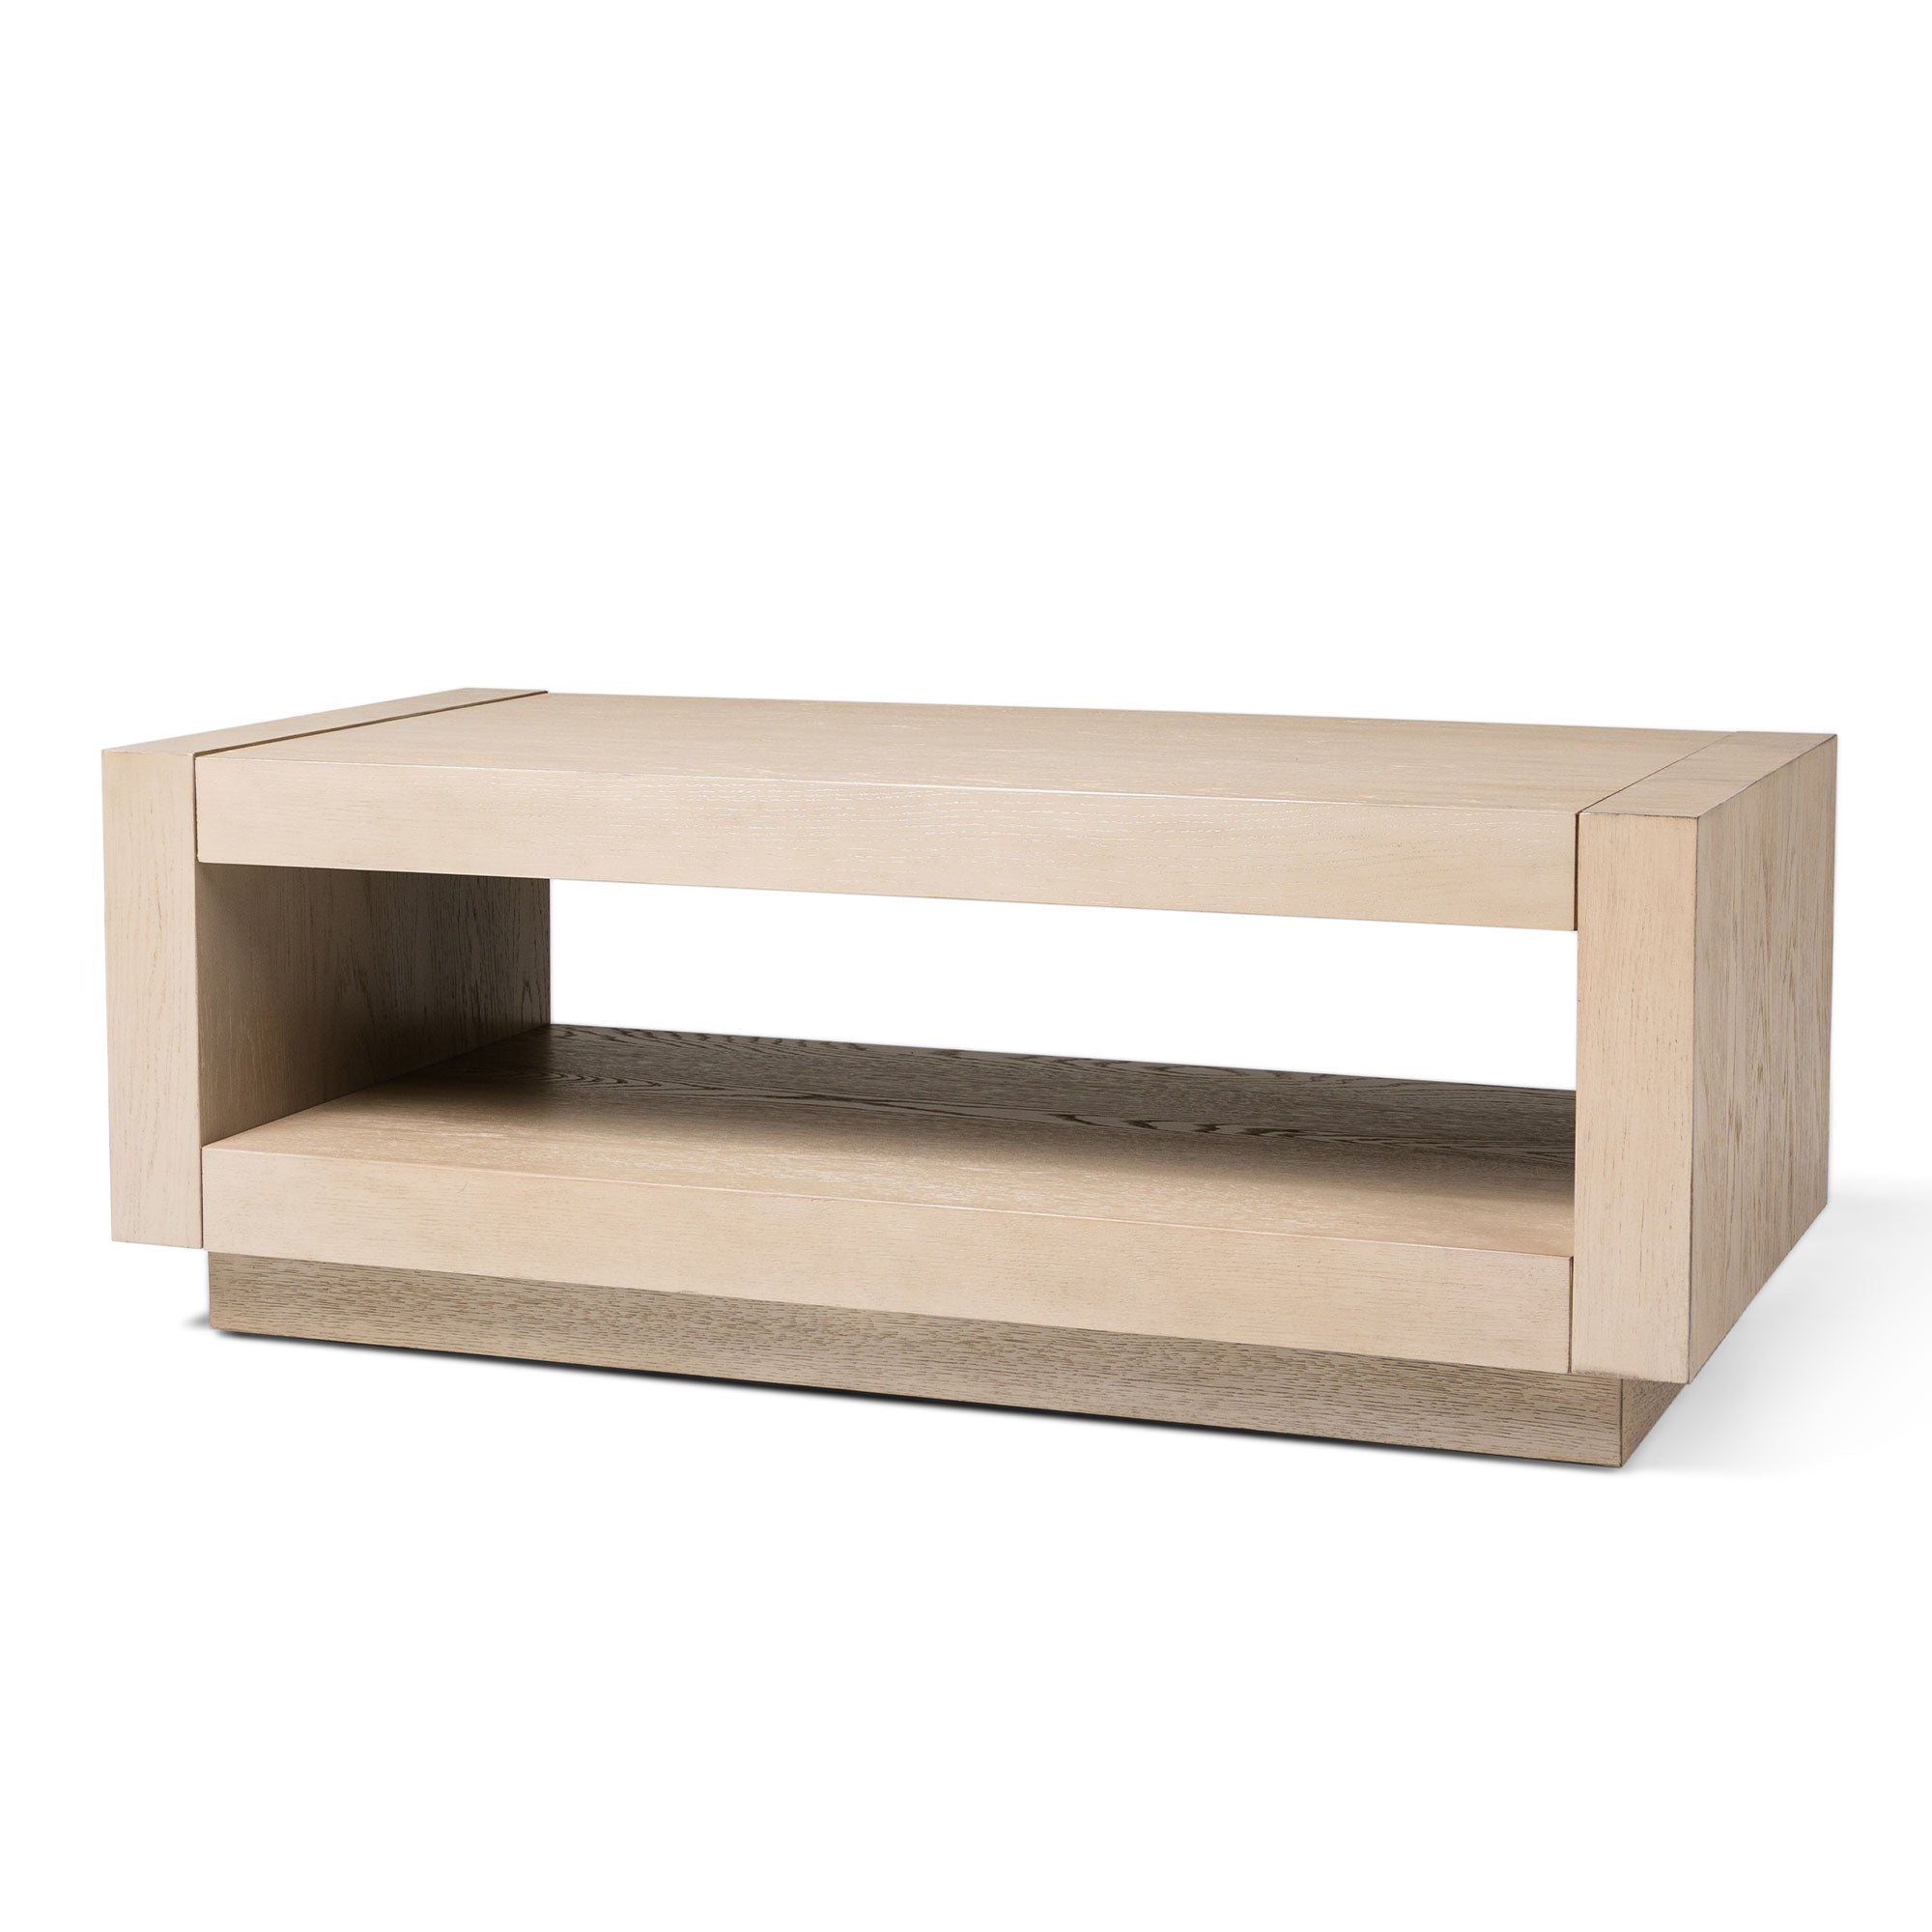 Artemis Contemporary Wooden Coffee Table in Refined White Finish in Accent Tables by Maven Lane